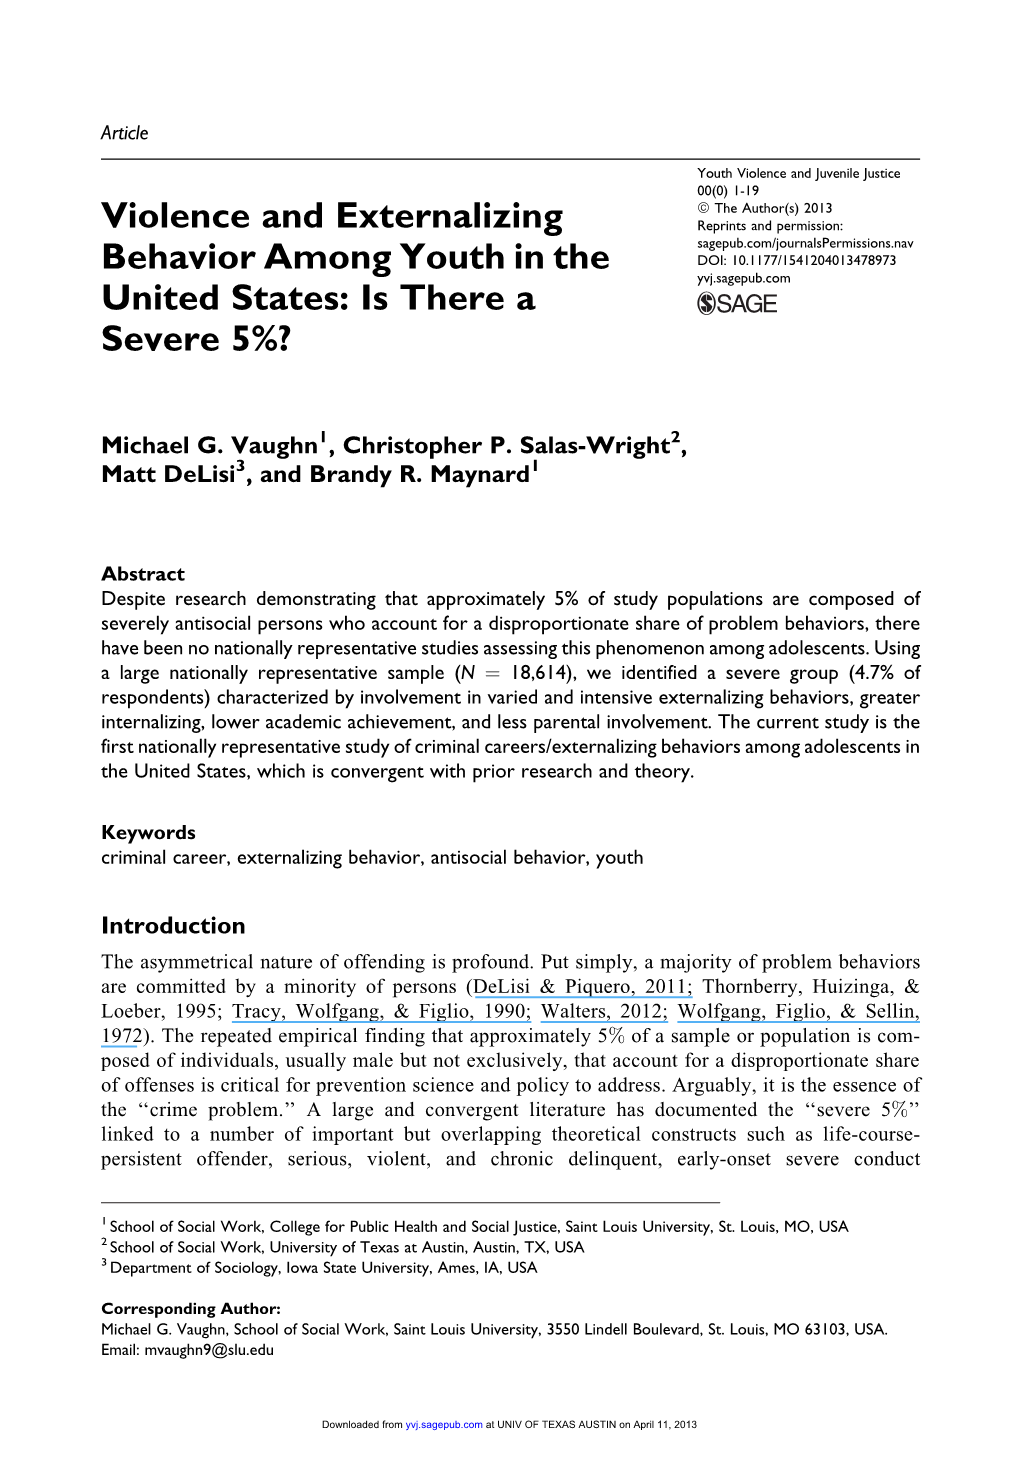 Violence and Externalizing Behavior Among Youth In